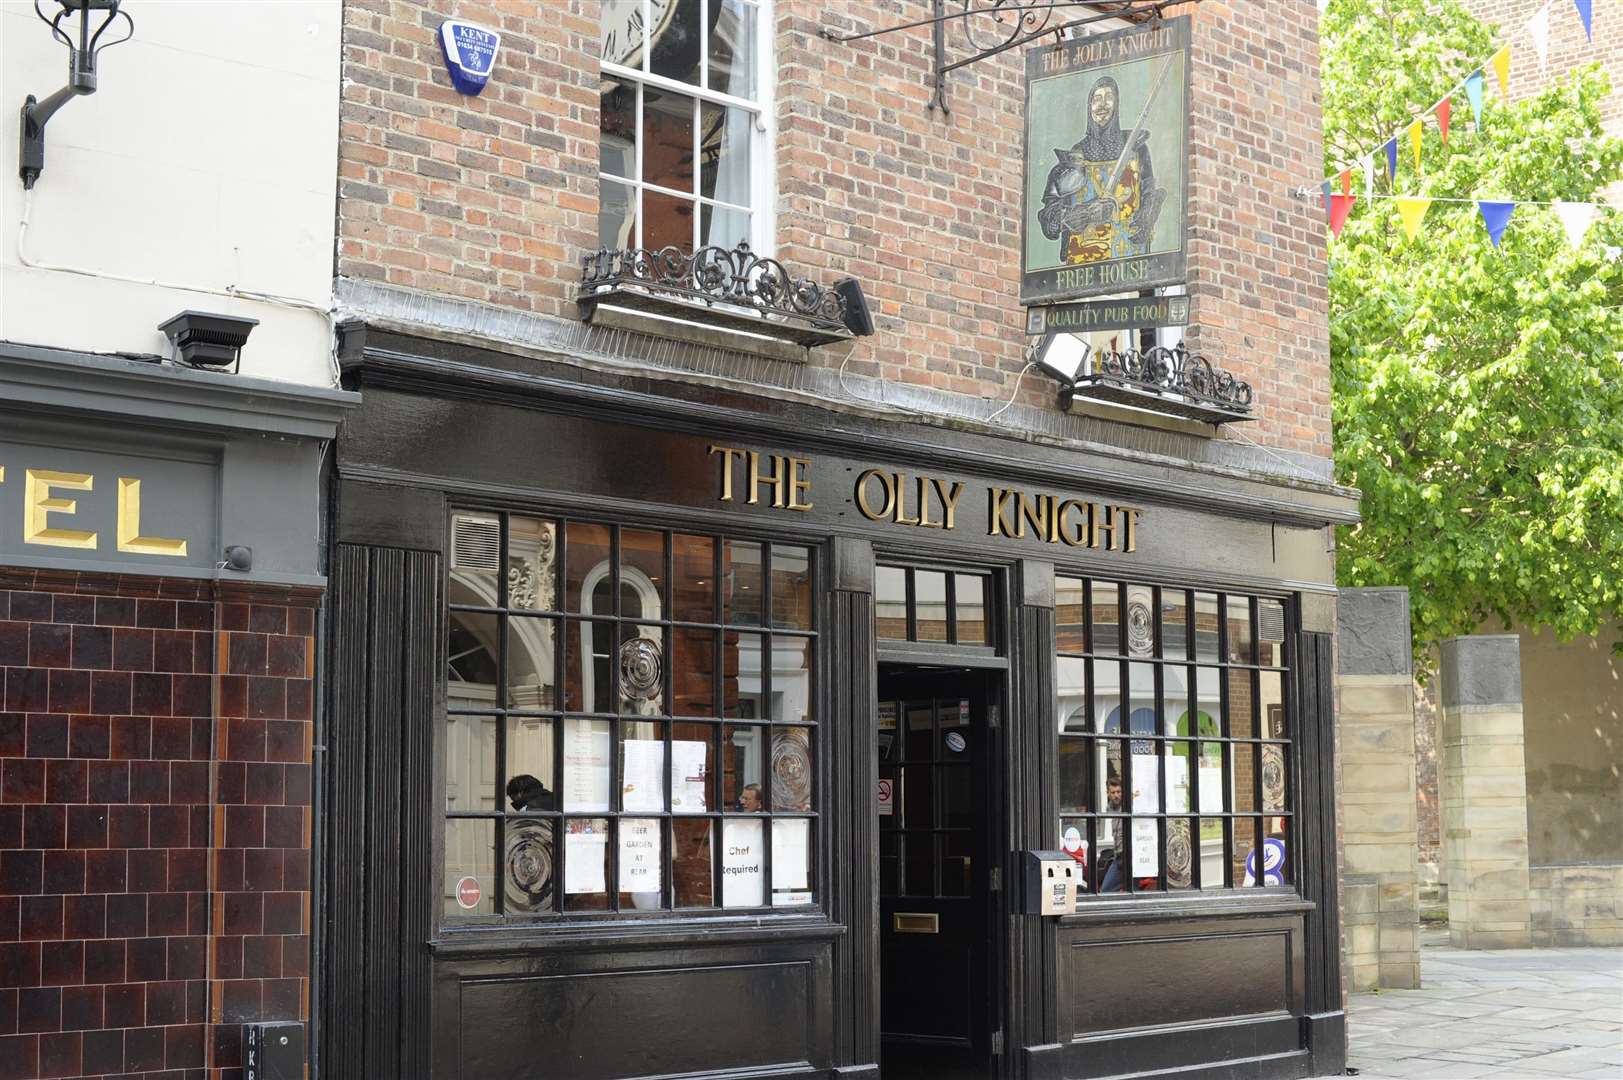 Jake Barguss was attacked outside the Jolly Knight pub in High Street, Rochester